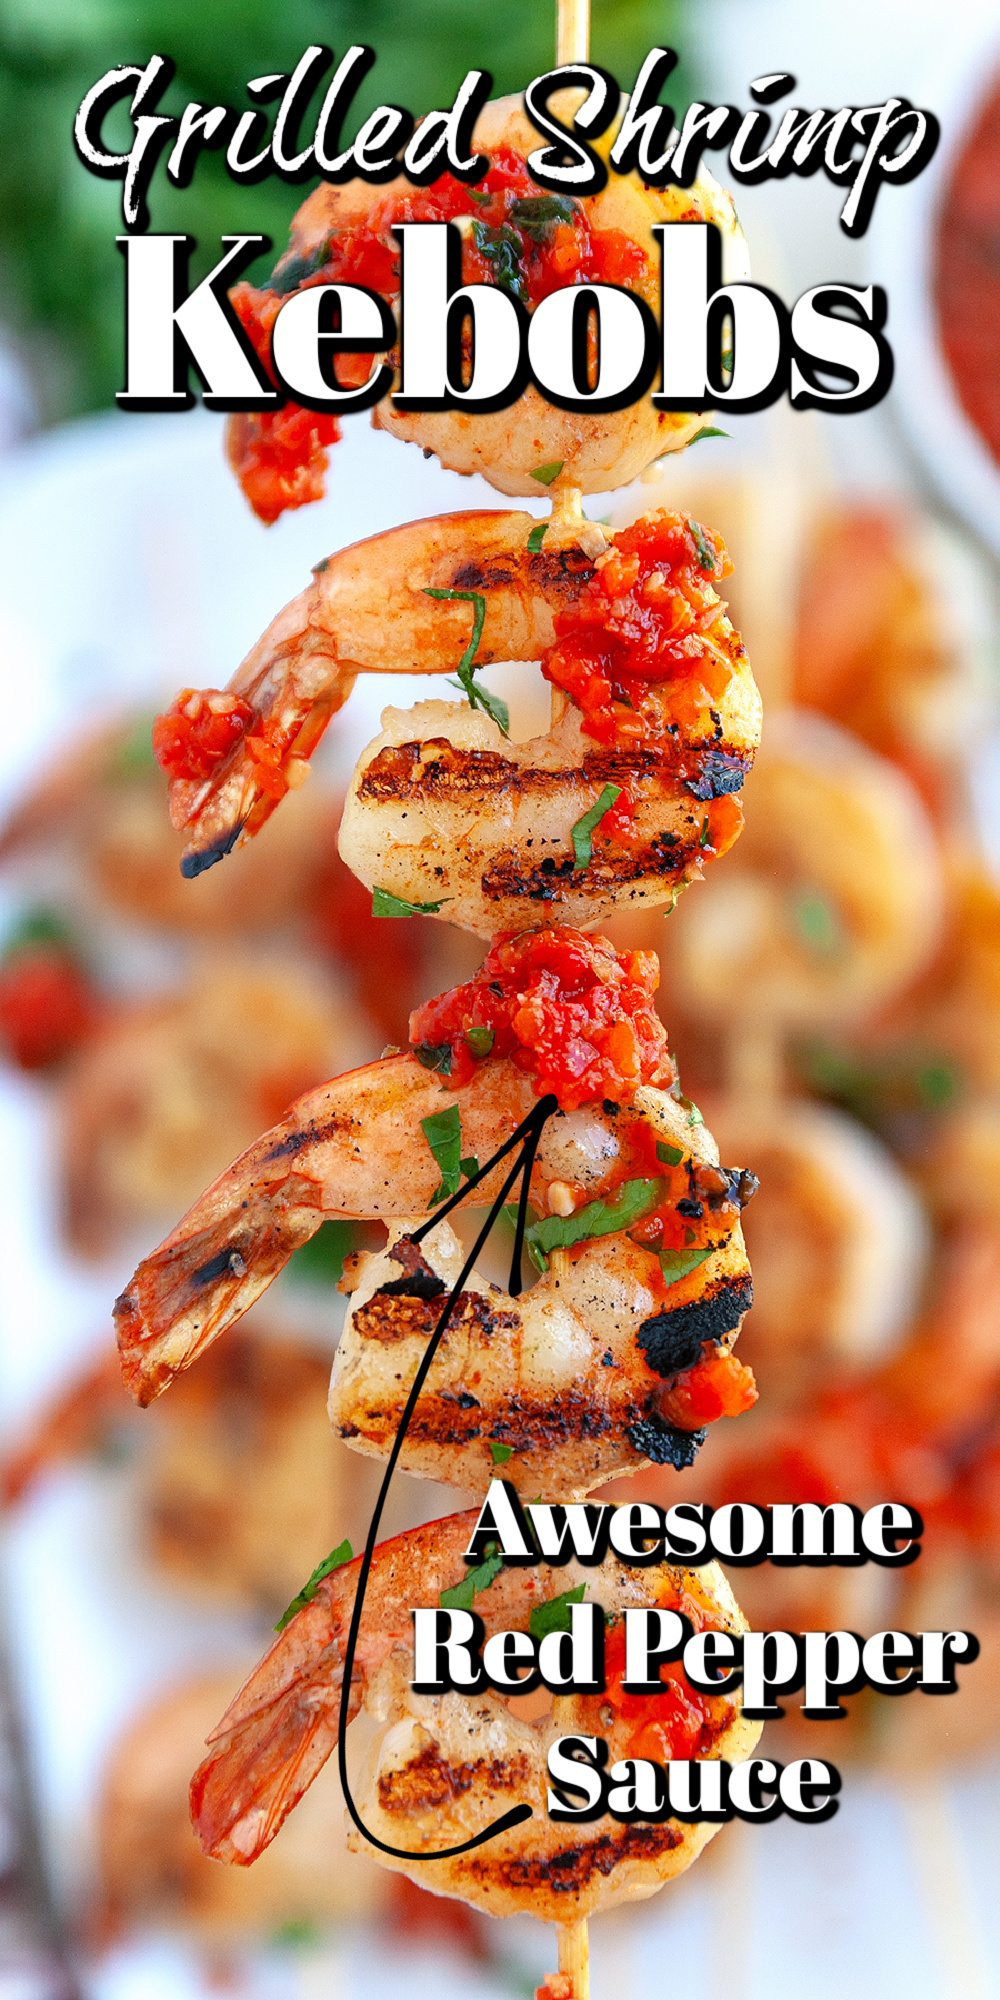 The pairing of the sweet and tangy red pepper sauce and the hint of citrus and spice of the shrimp come together to make this recipe absolutely superb! 